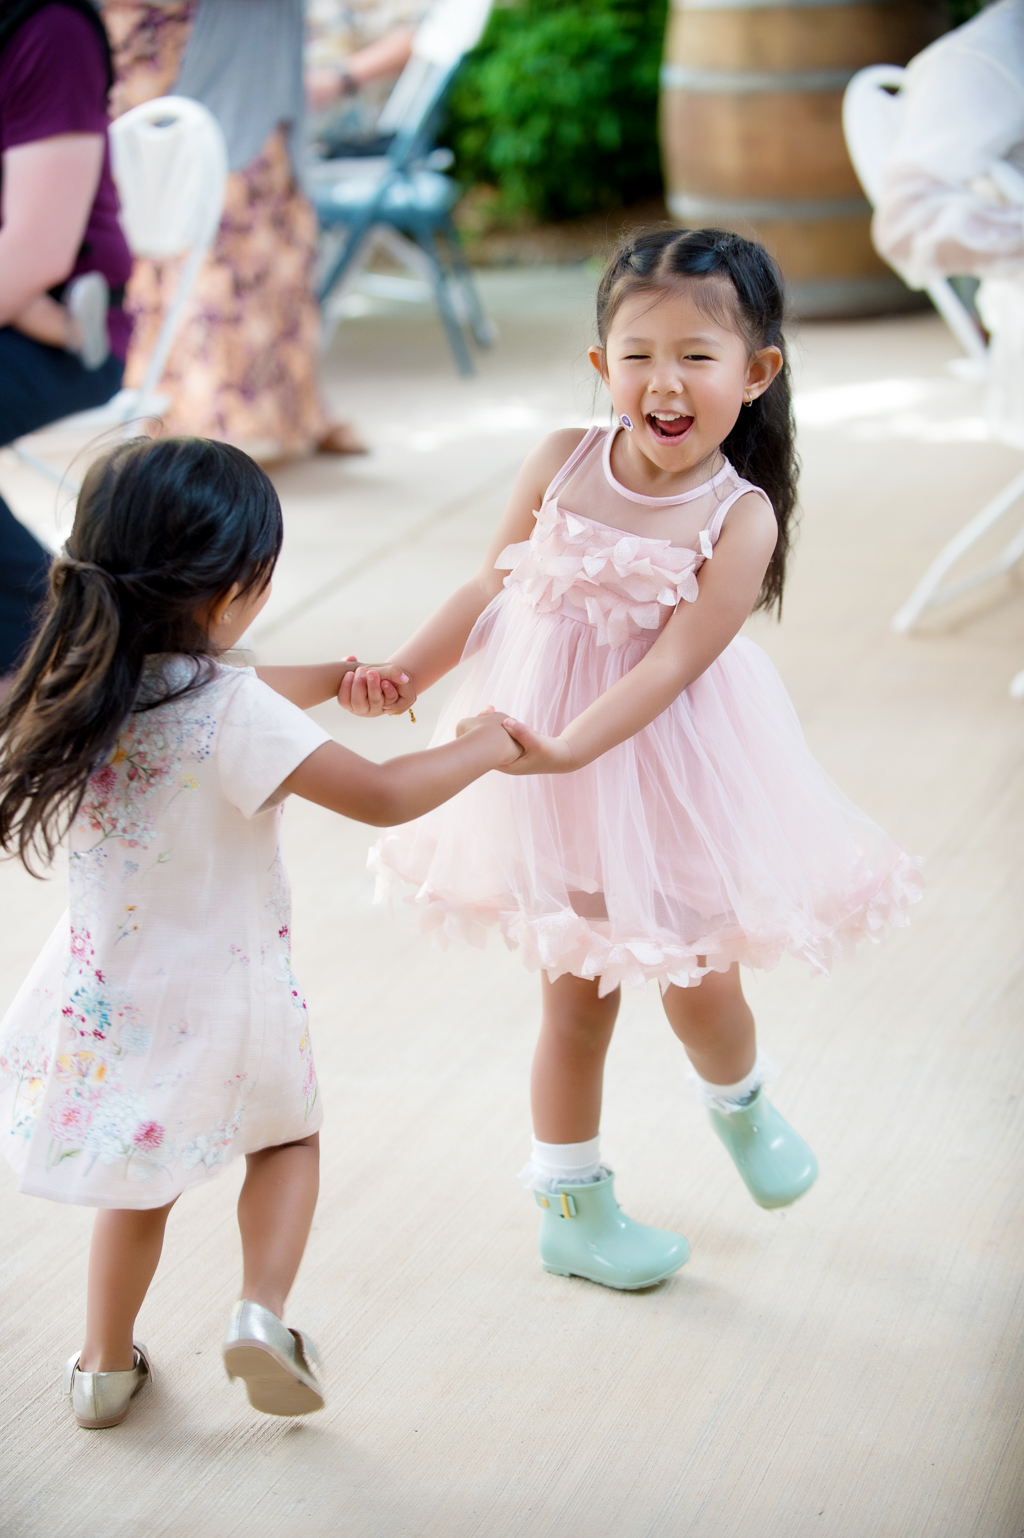 a flower girl in a pink dress and mint green rain boots dances with another girl during the wedding reception